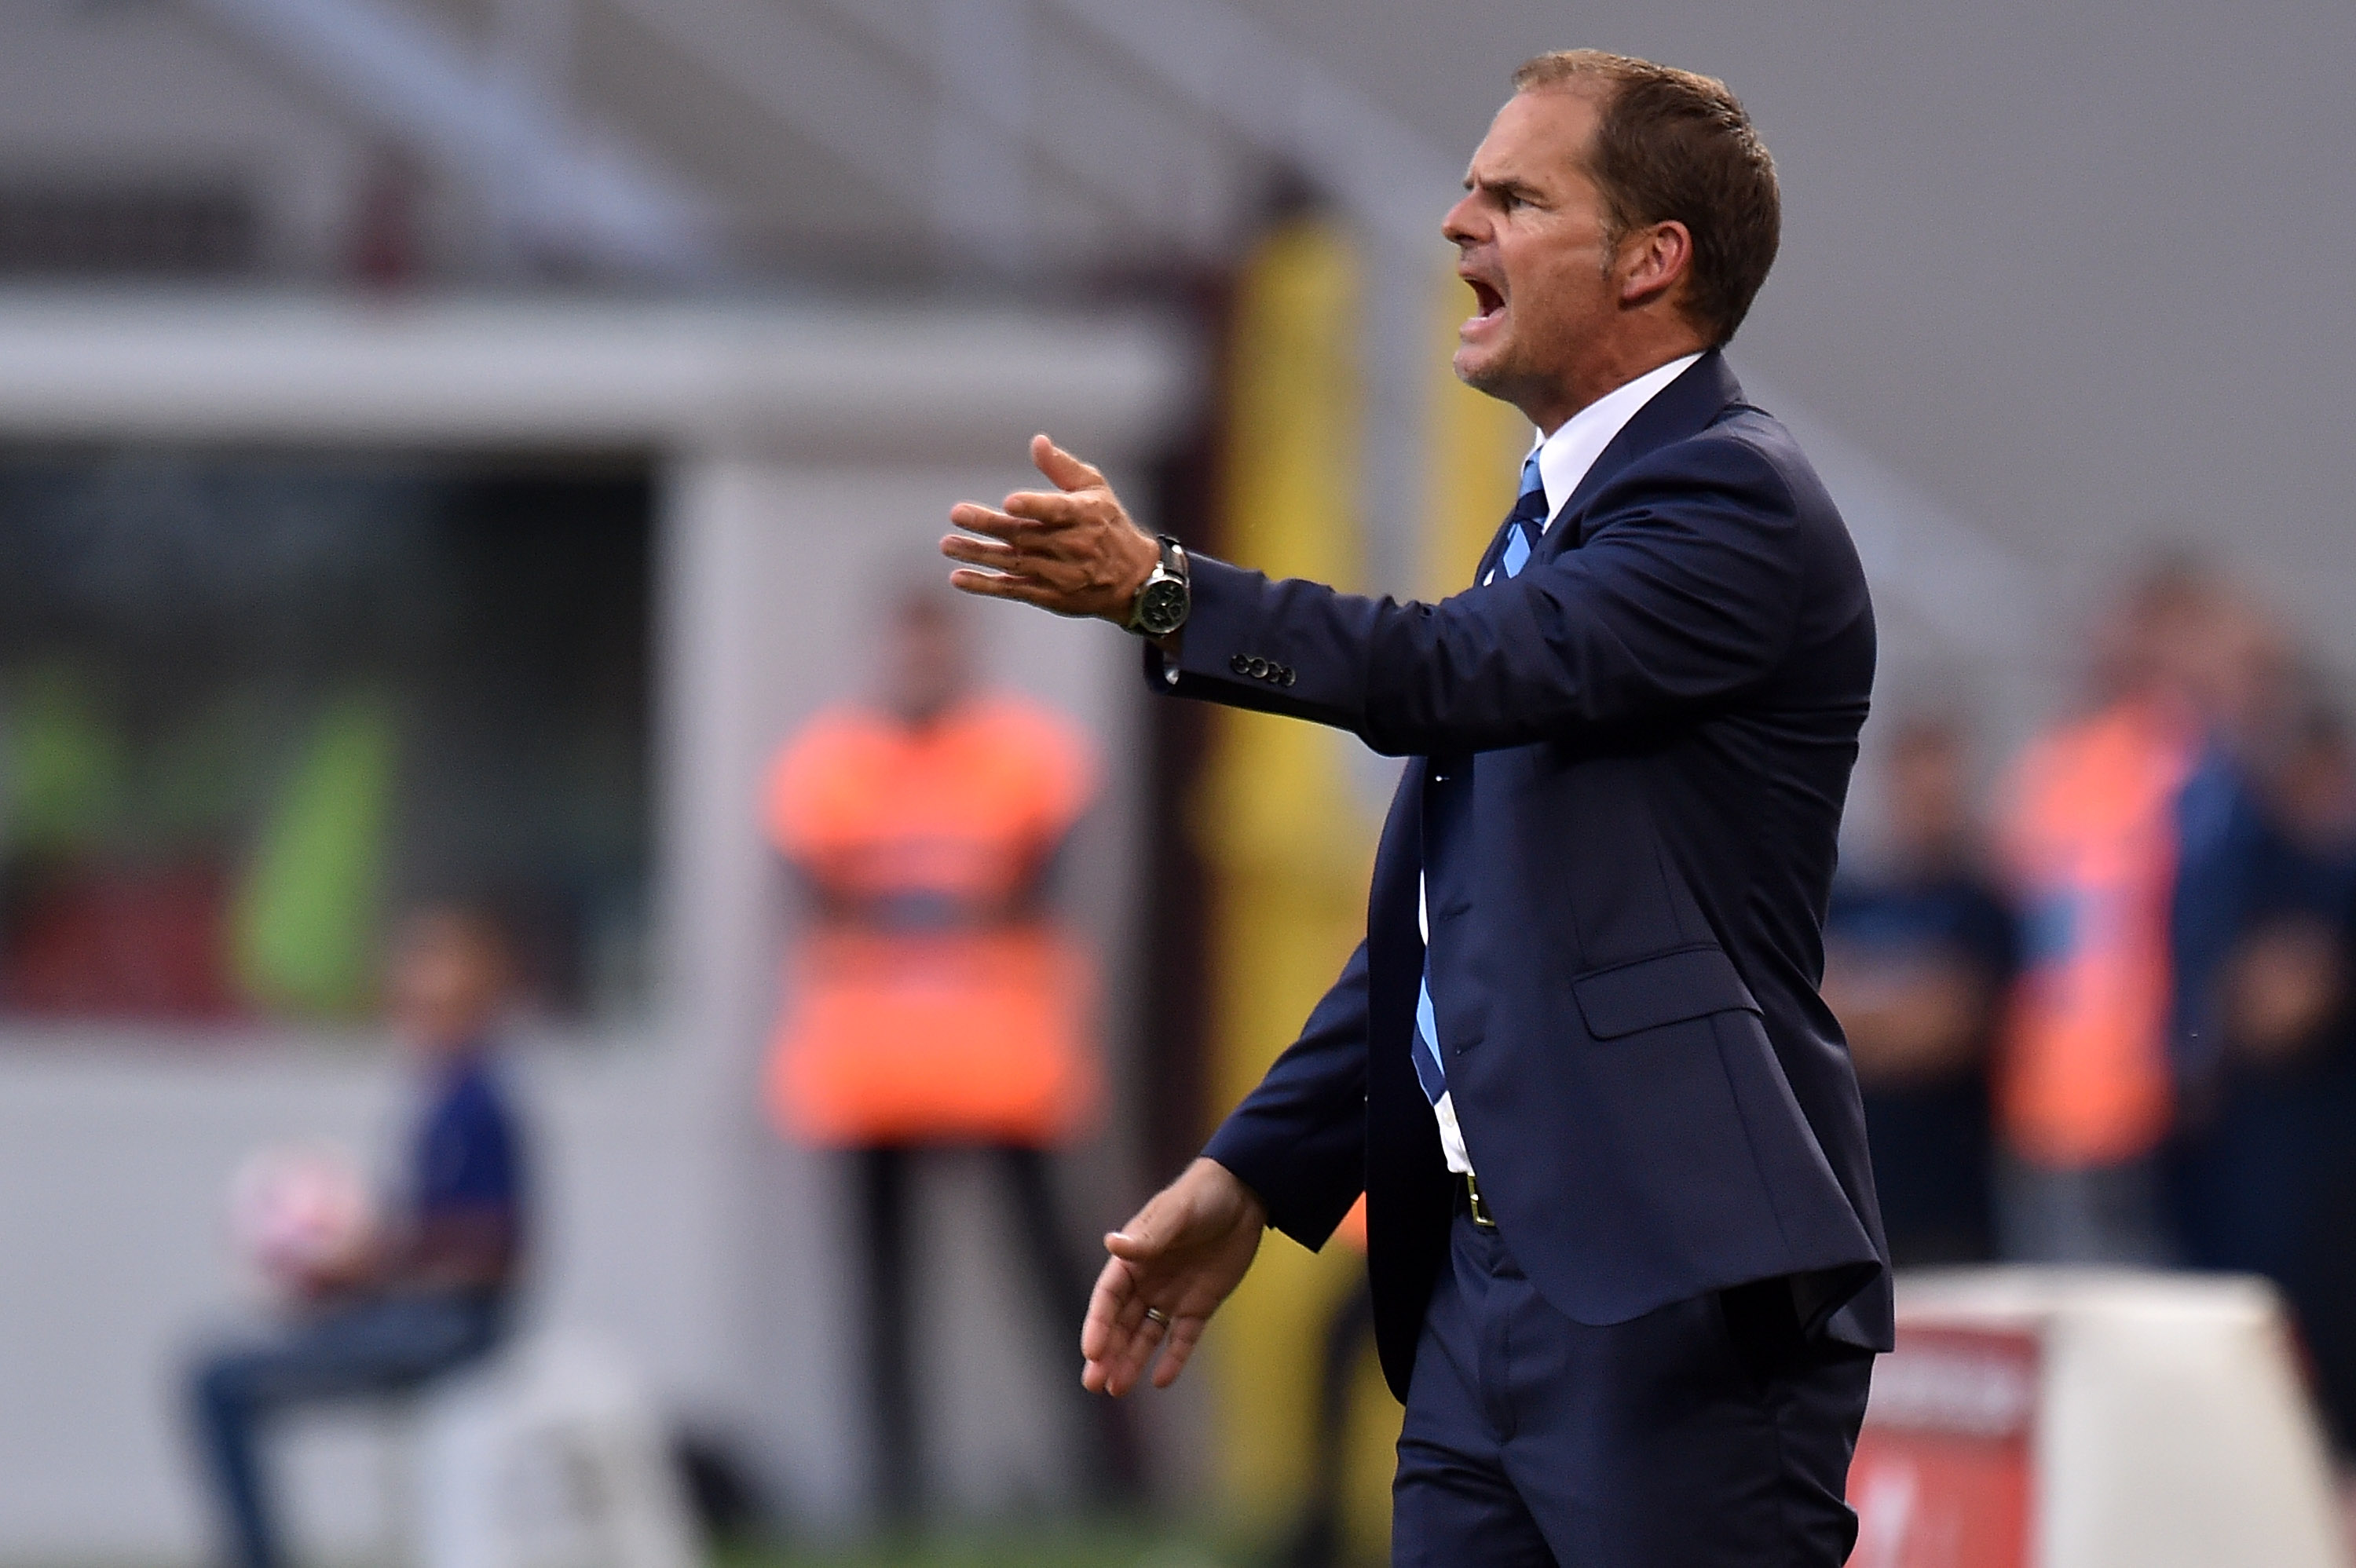 GdS: Seven days for De Boer to show the real Inter.